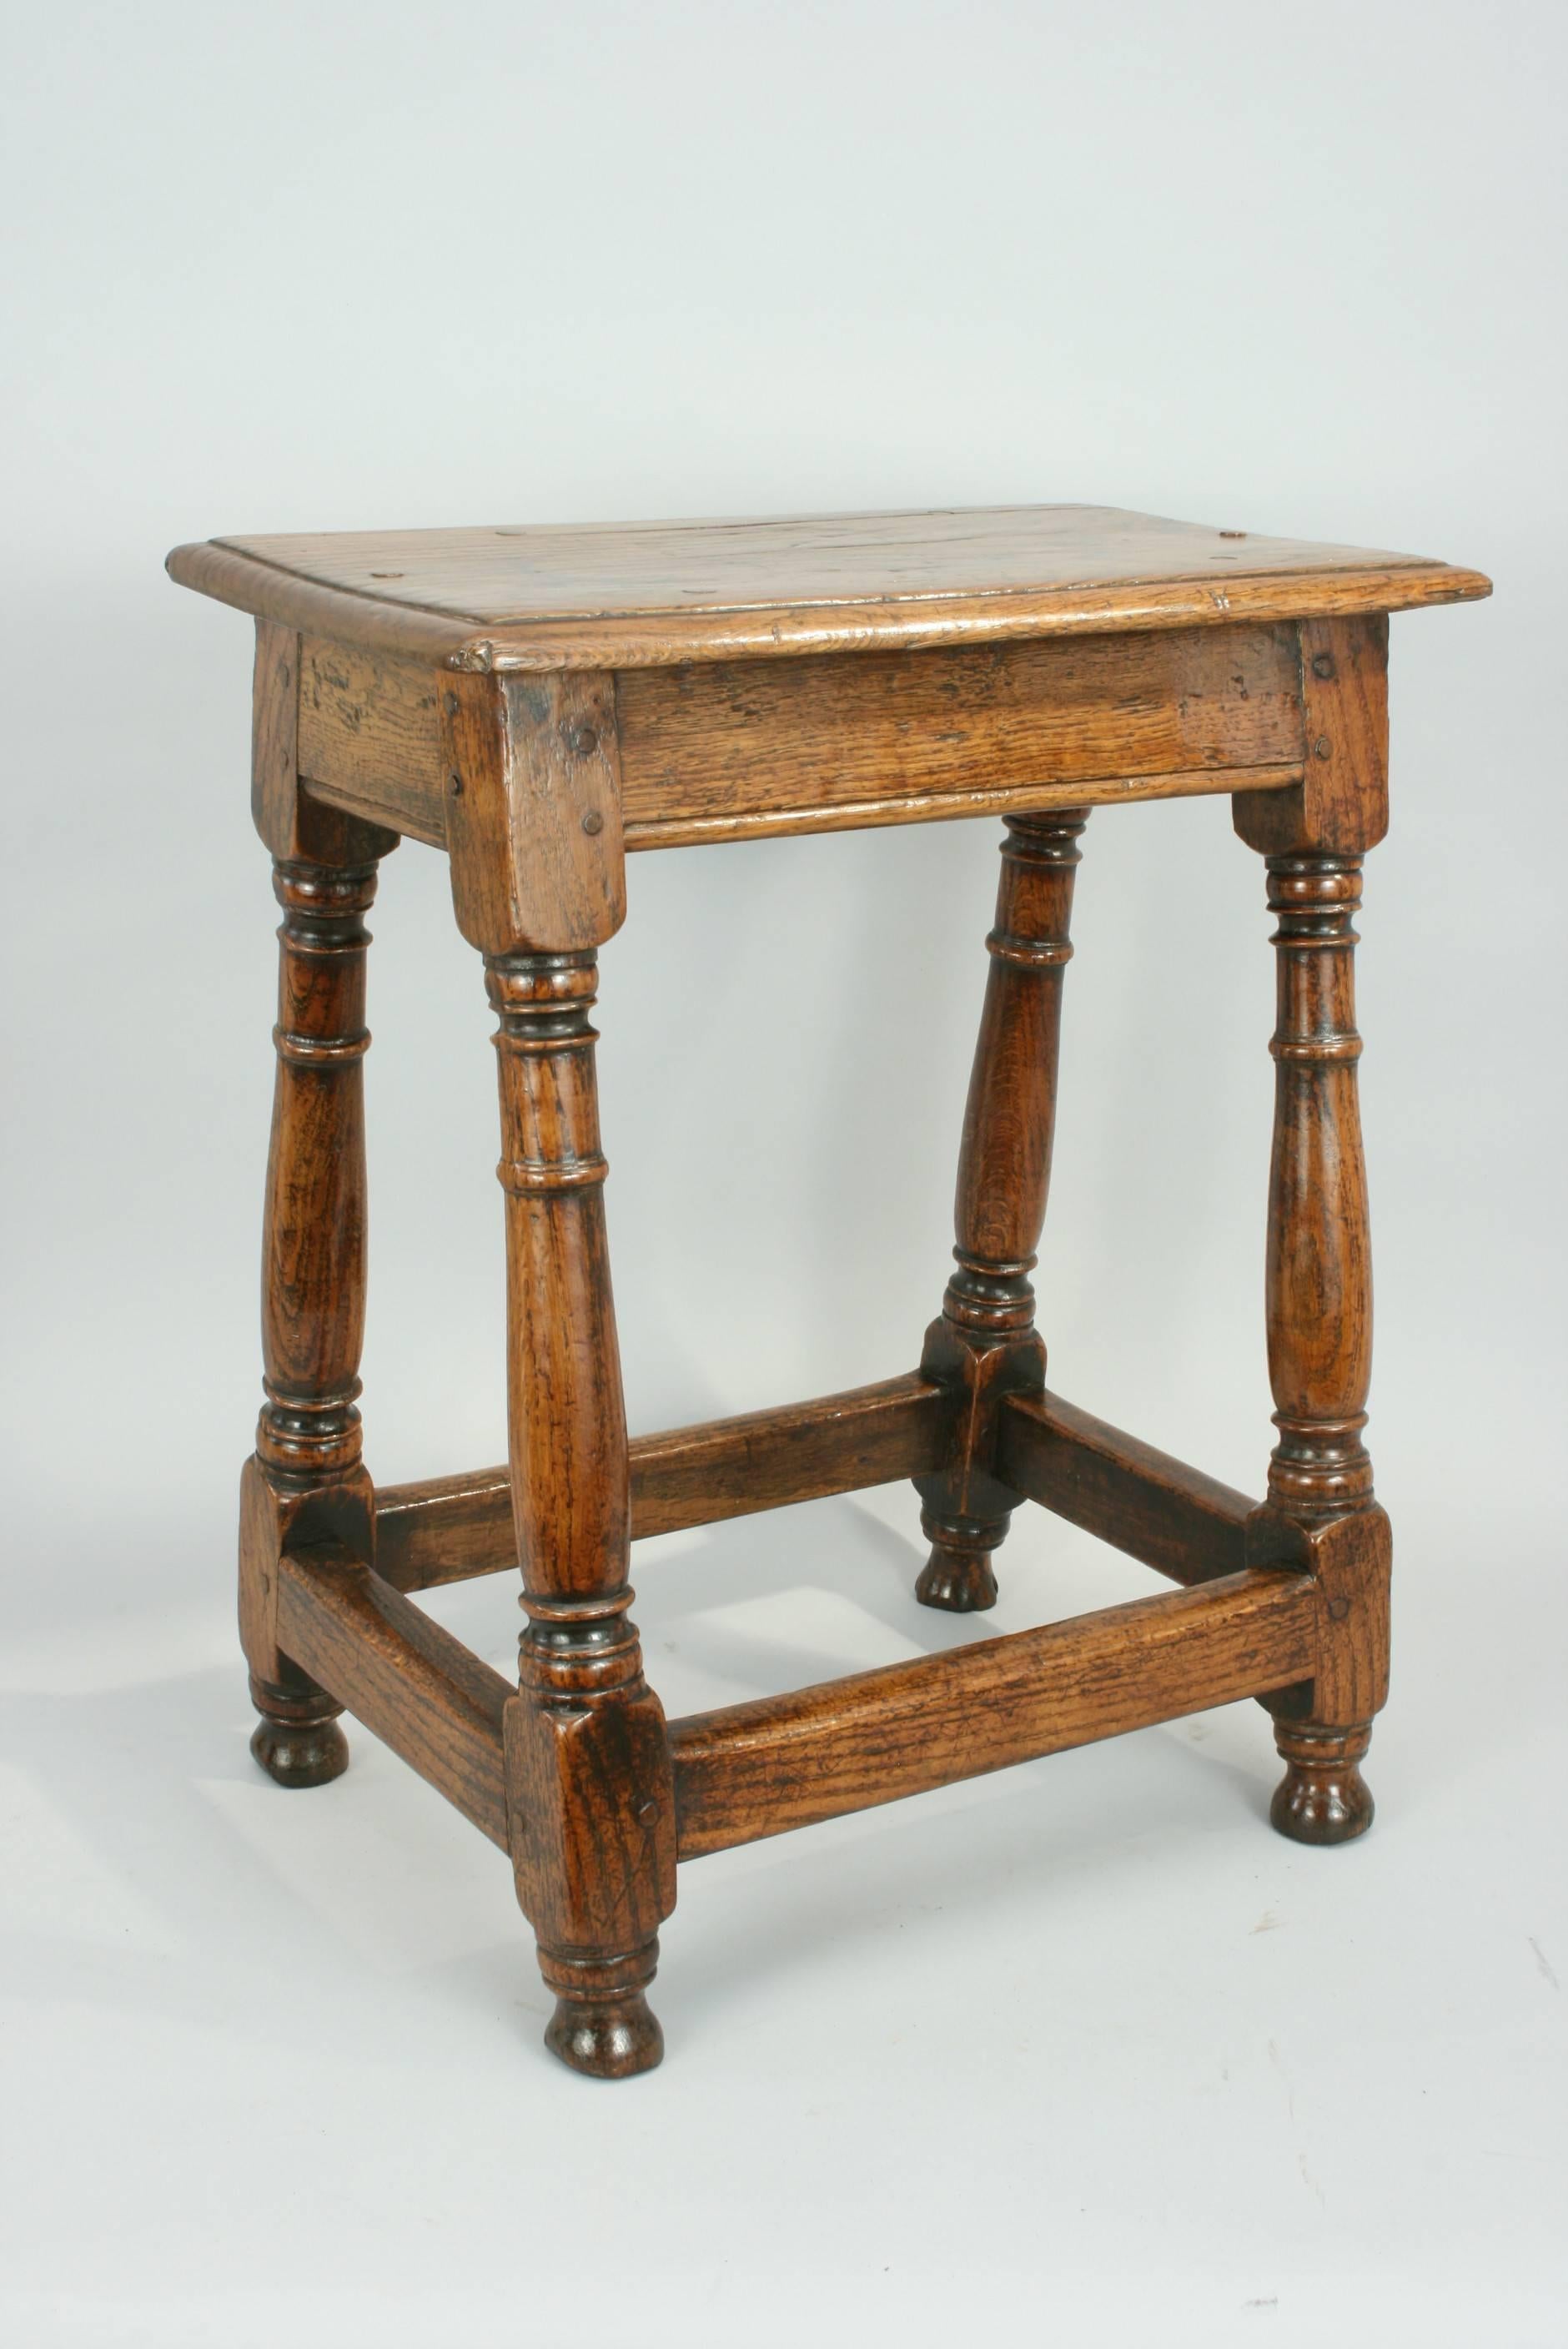 An early oak joint stool in original condition with wonderful colour and patina. The moulded rectangular top is pegged onto the base, which consists of moulded top rails, attractive baluster and peg turned legs with turned 'toes'. The legs are built